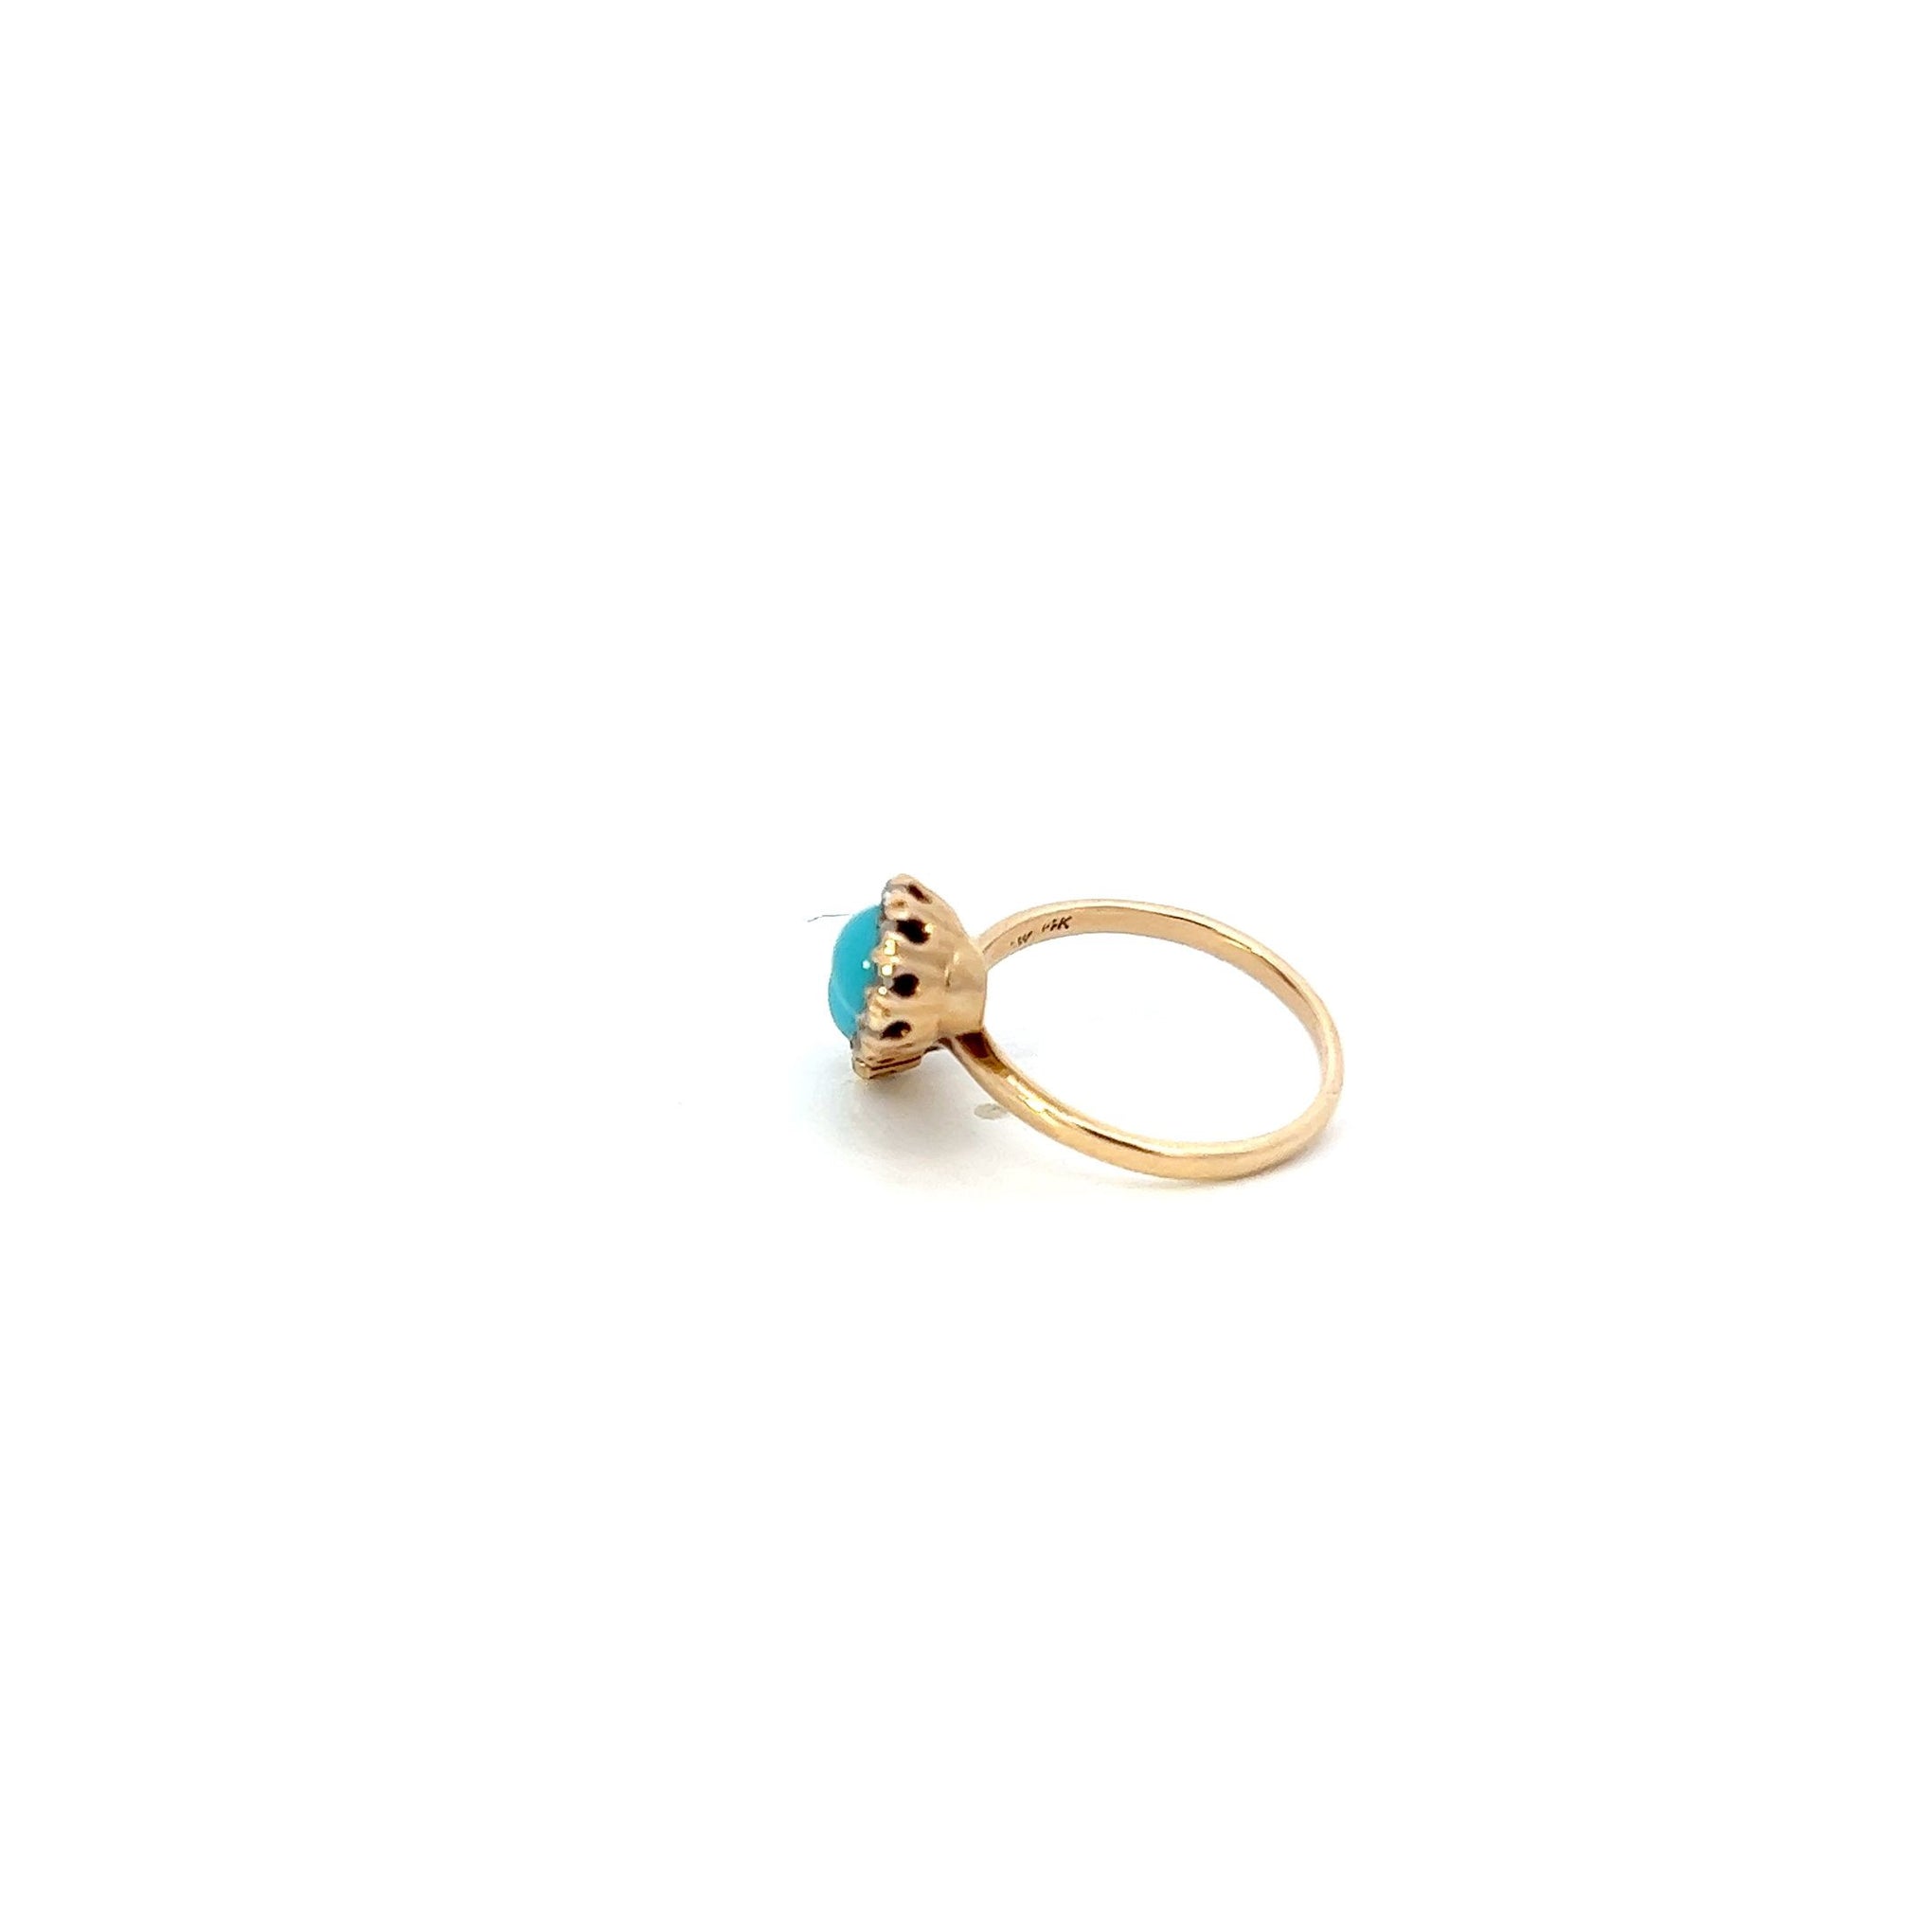 VINTAGE 14KT YELLOW GOLD DOUBLE GENUINE TURQUOISE AND DIAMOND RING